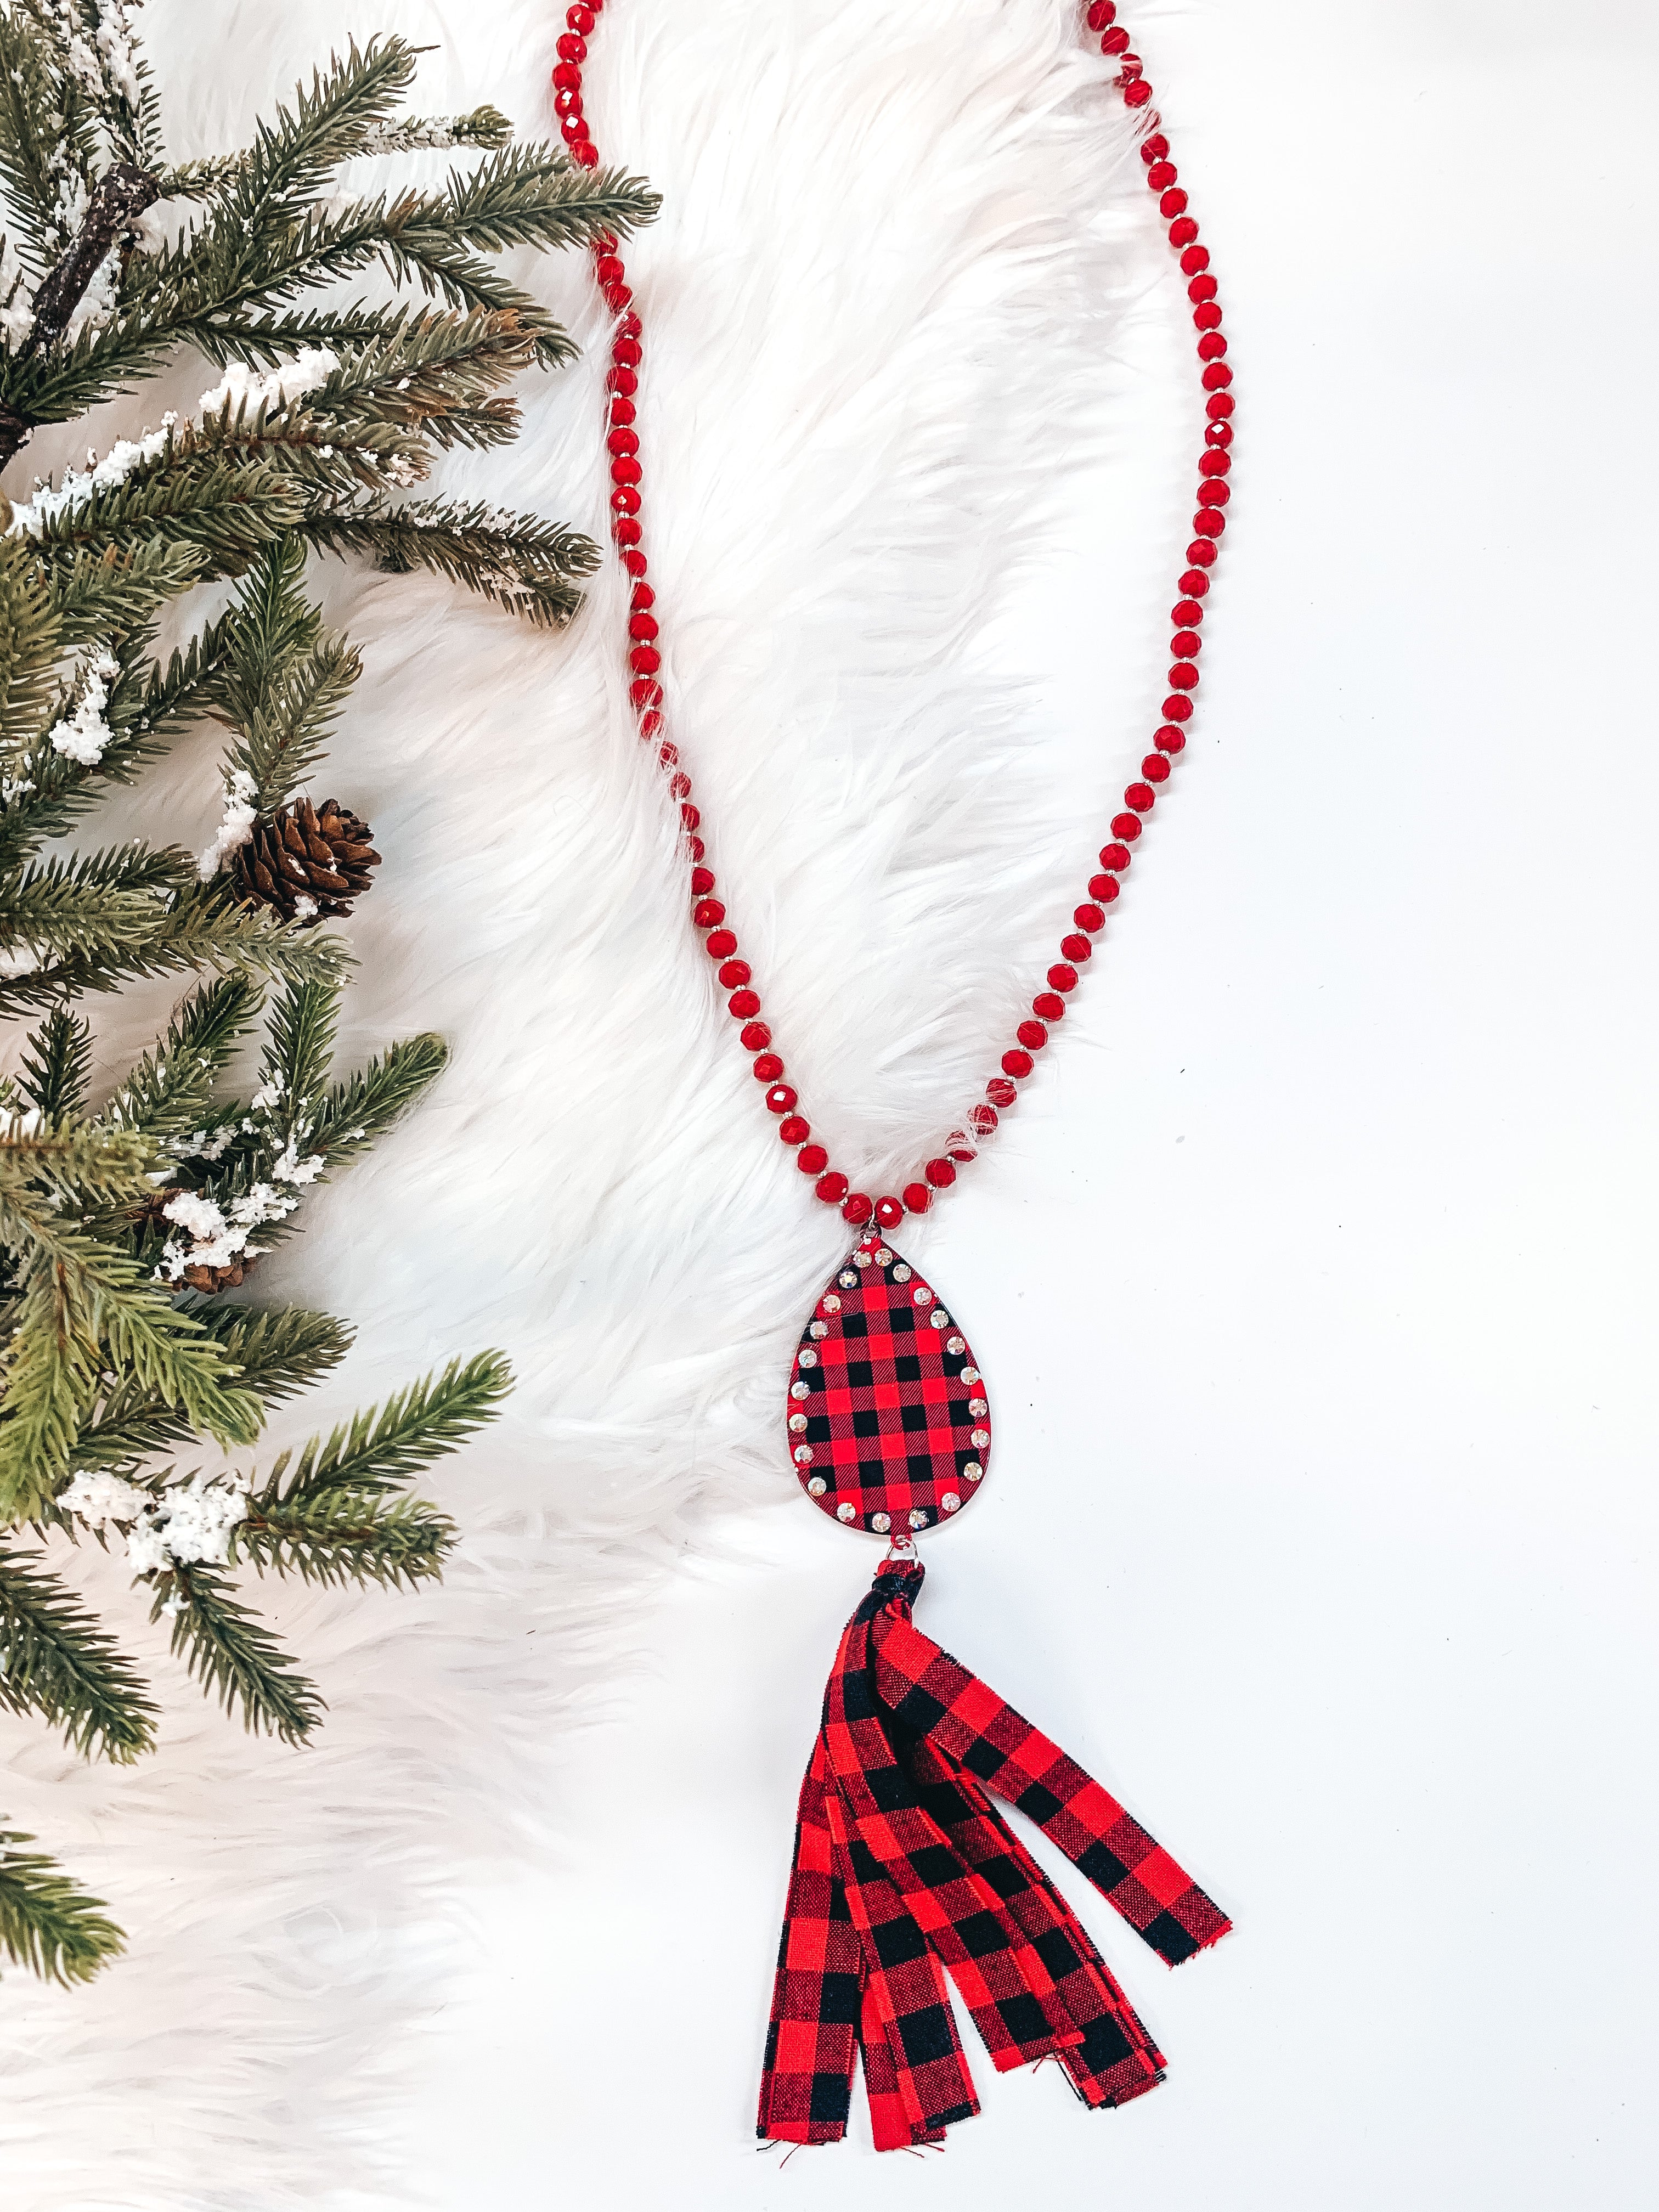 Crystal Beaded Necklace with Buffalo Plaid Teardrop Pendant and Tassel in Red - Giddy Up Glamour Boutique